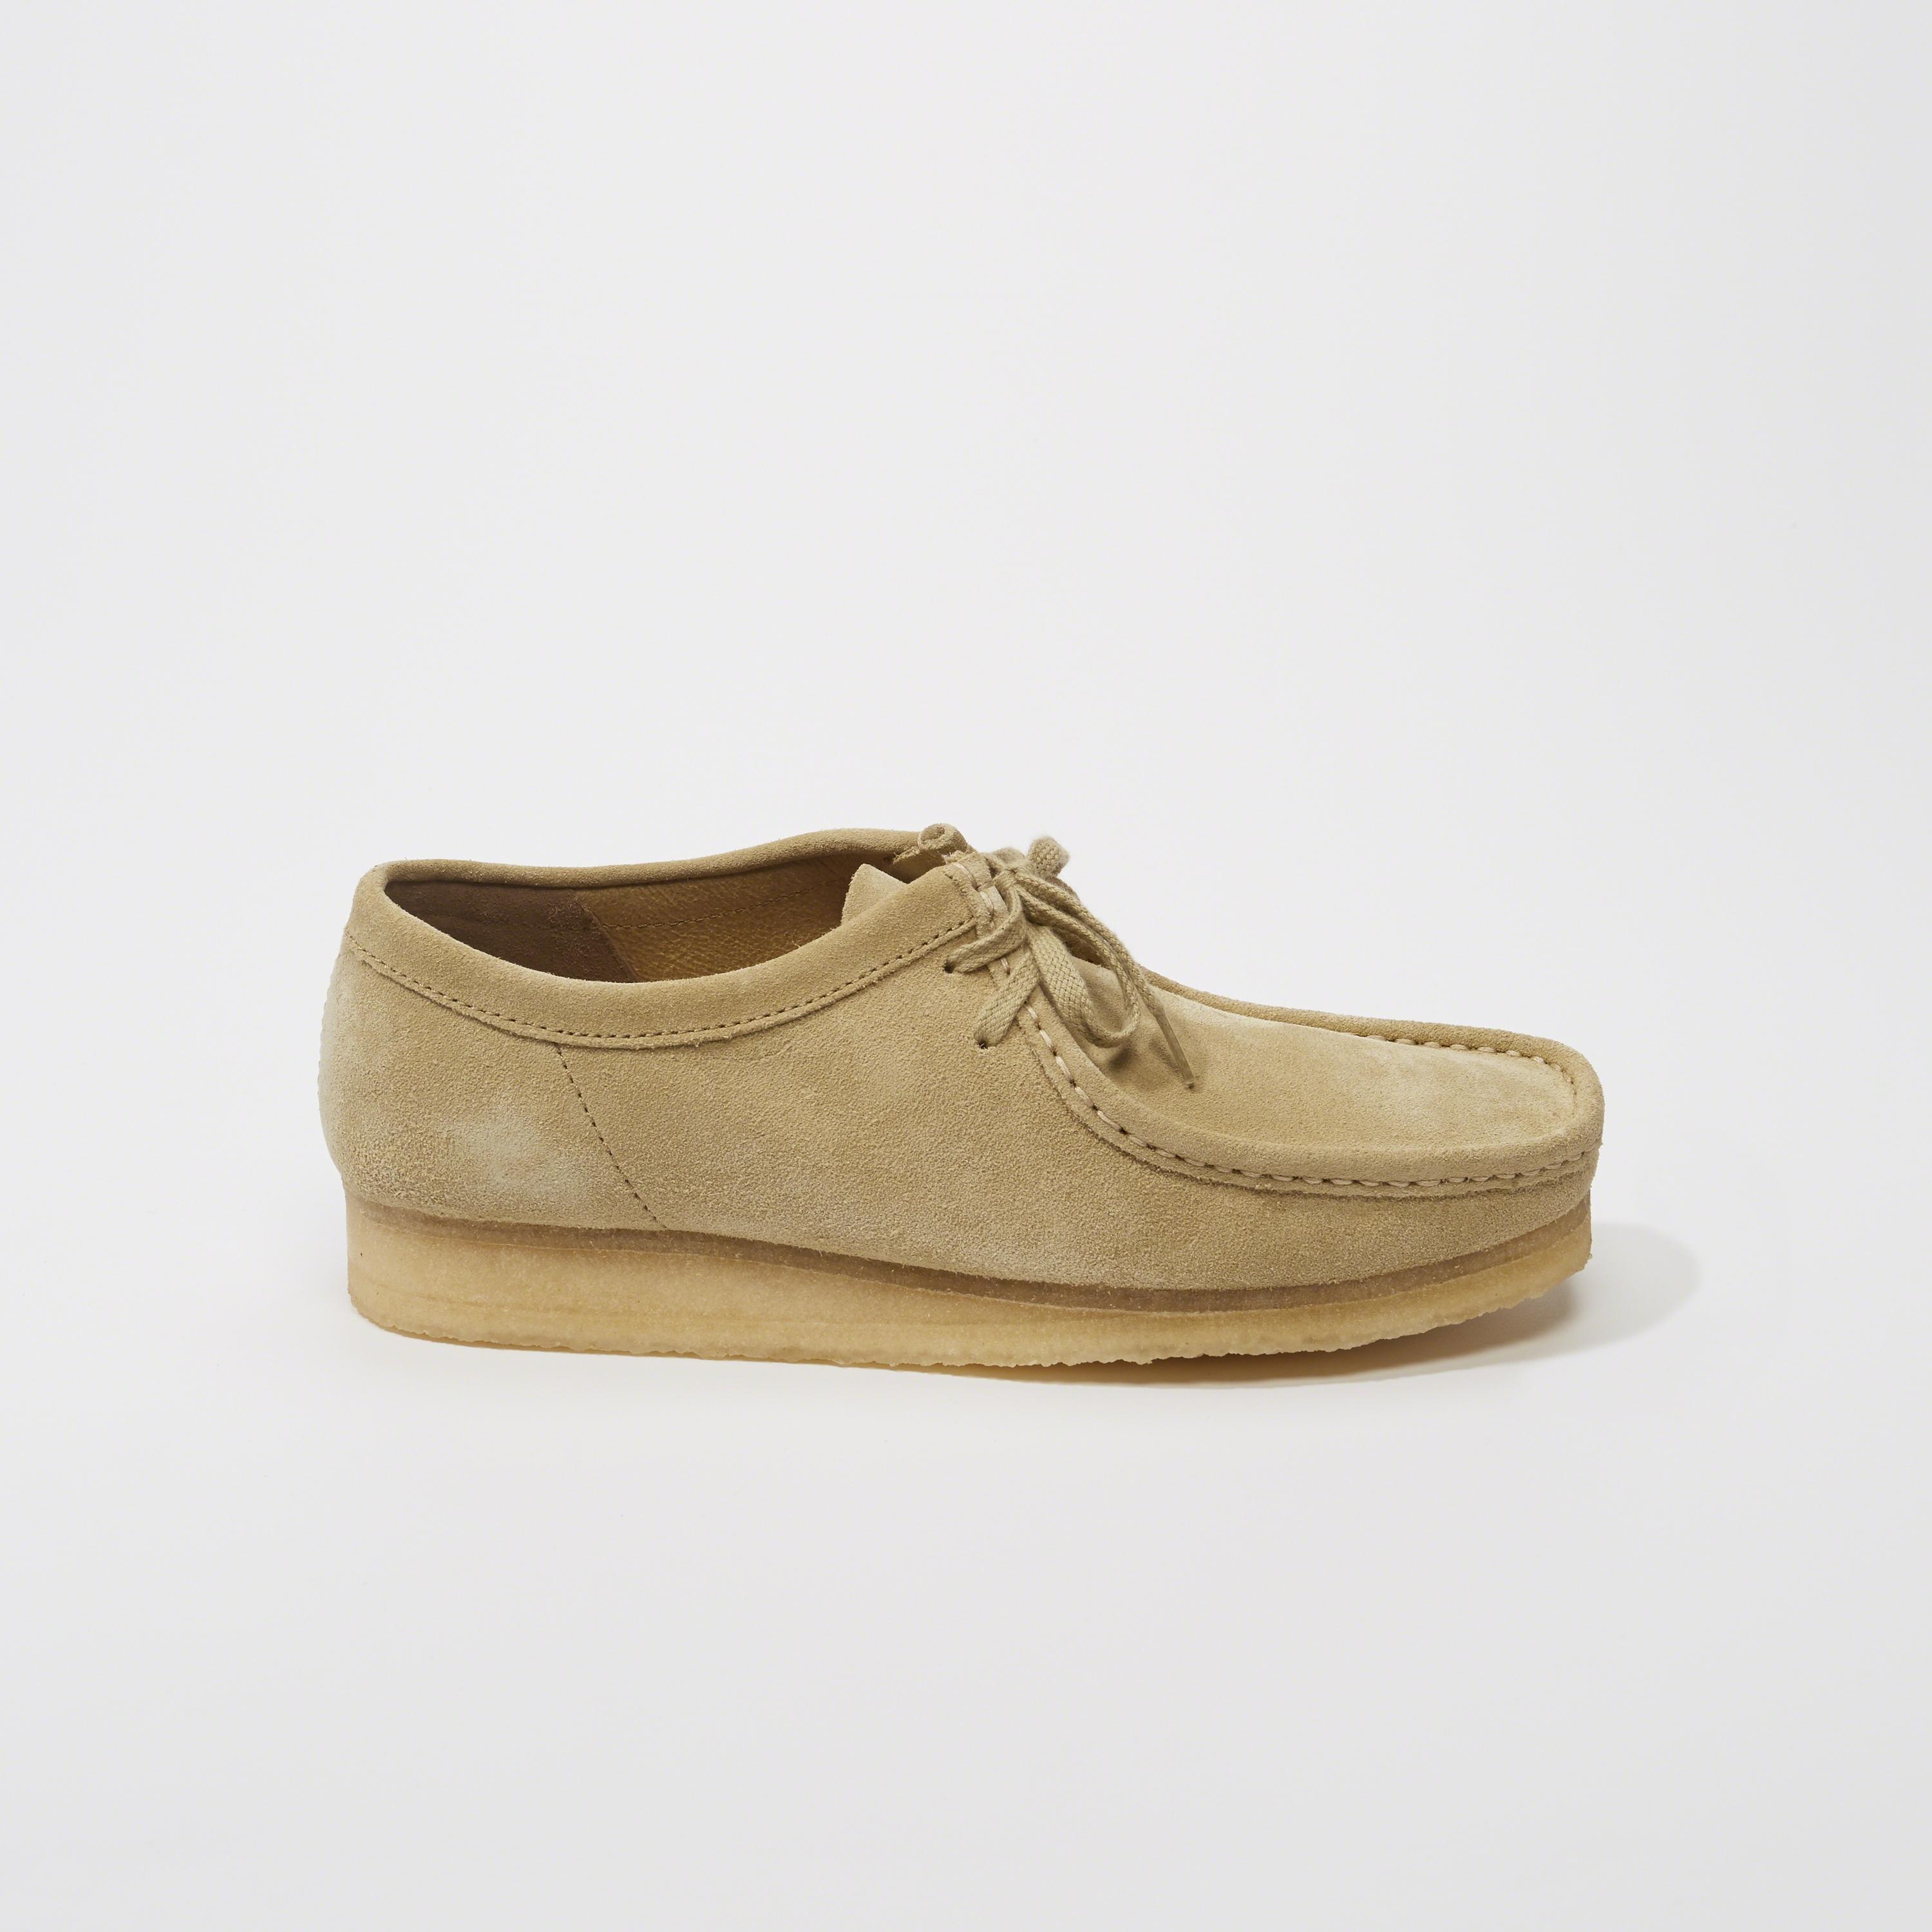 Lyst - Abercrombie & fitch Clarks Wallabee Shoe in Natural for Men